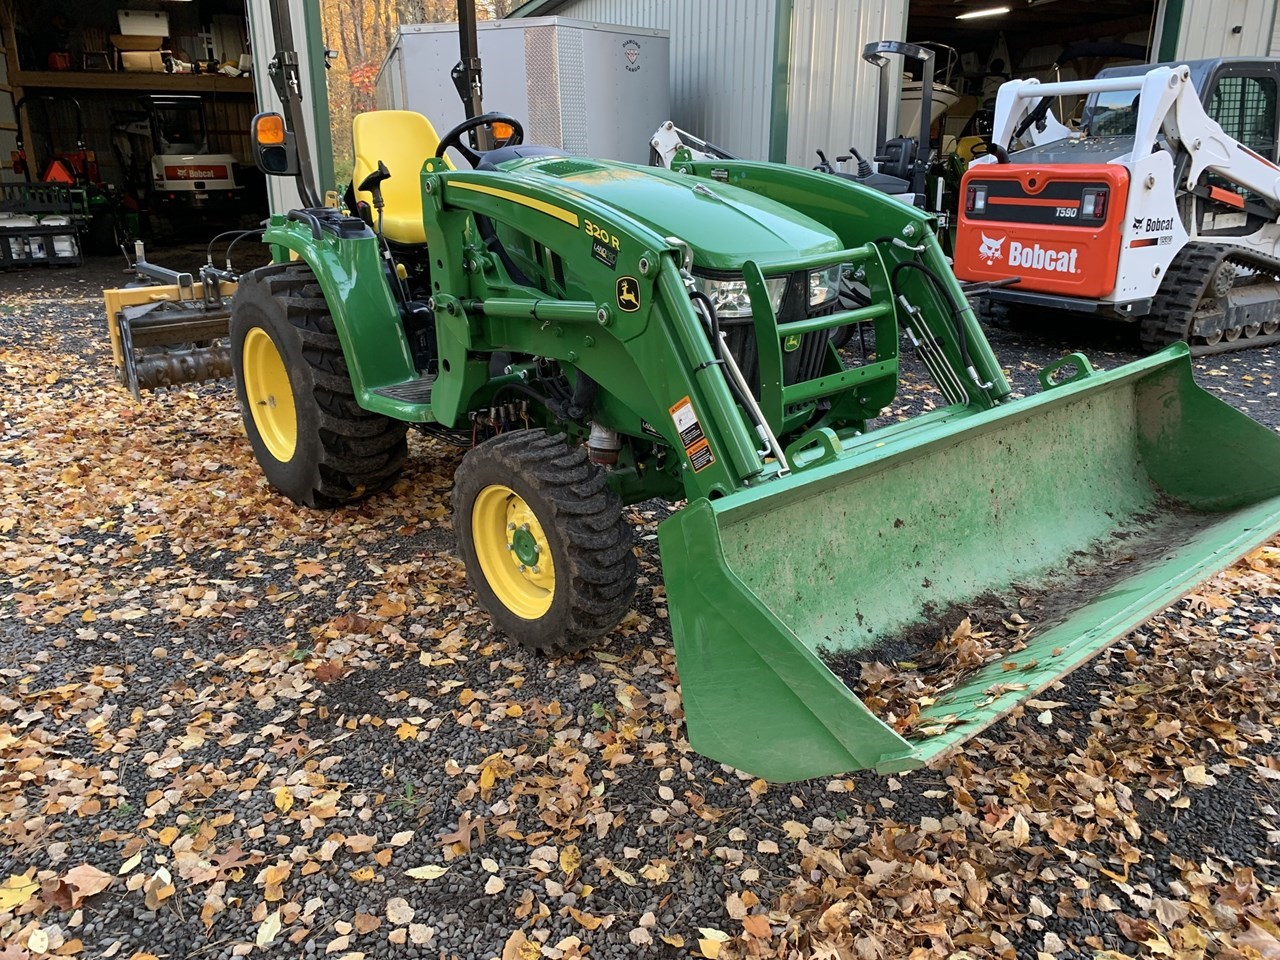 2018 John Deere 3039R Tractor - Compact Utility For Sale